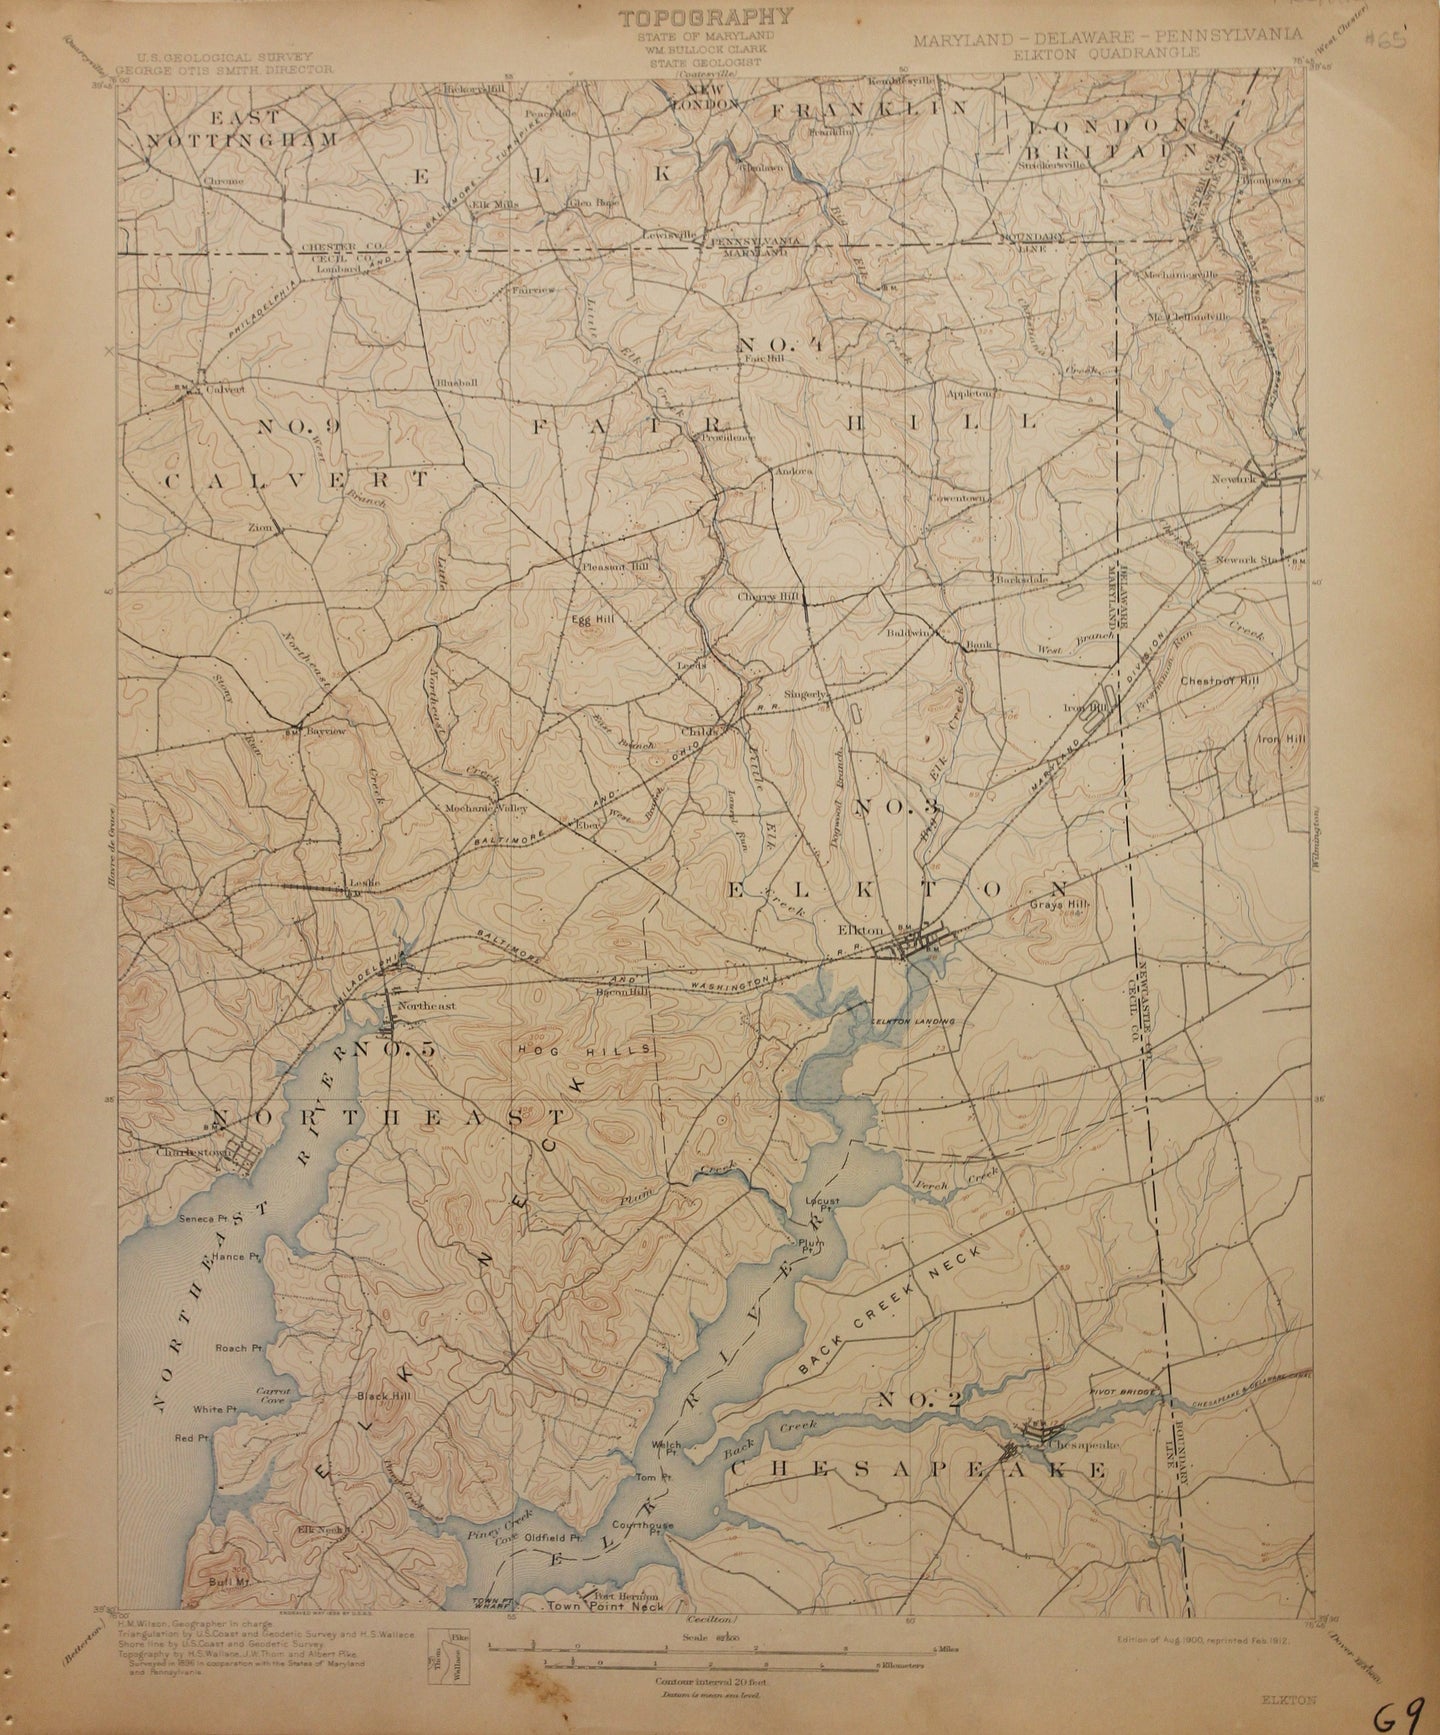 Genuine-Antique-Map-Elkton--Maryland-Delaware-and-Pennsylvania---1912-U-S-Geological-Survey--Maps-Of-Antiquity